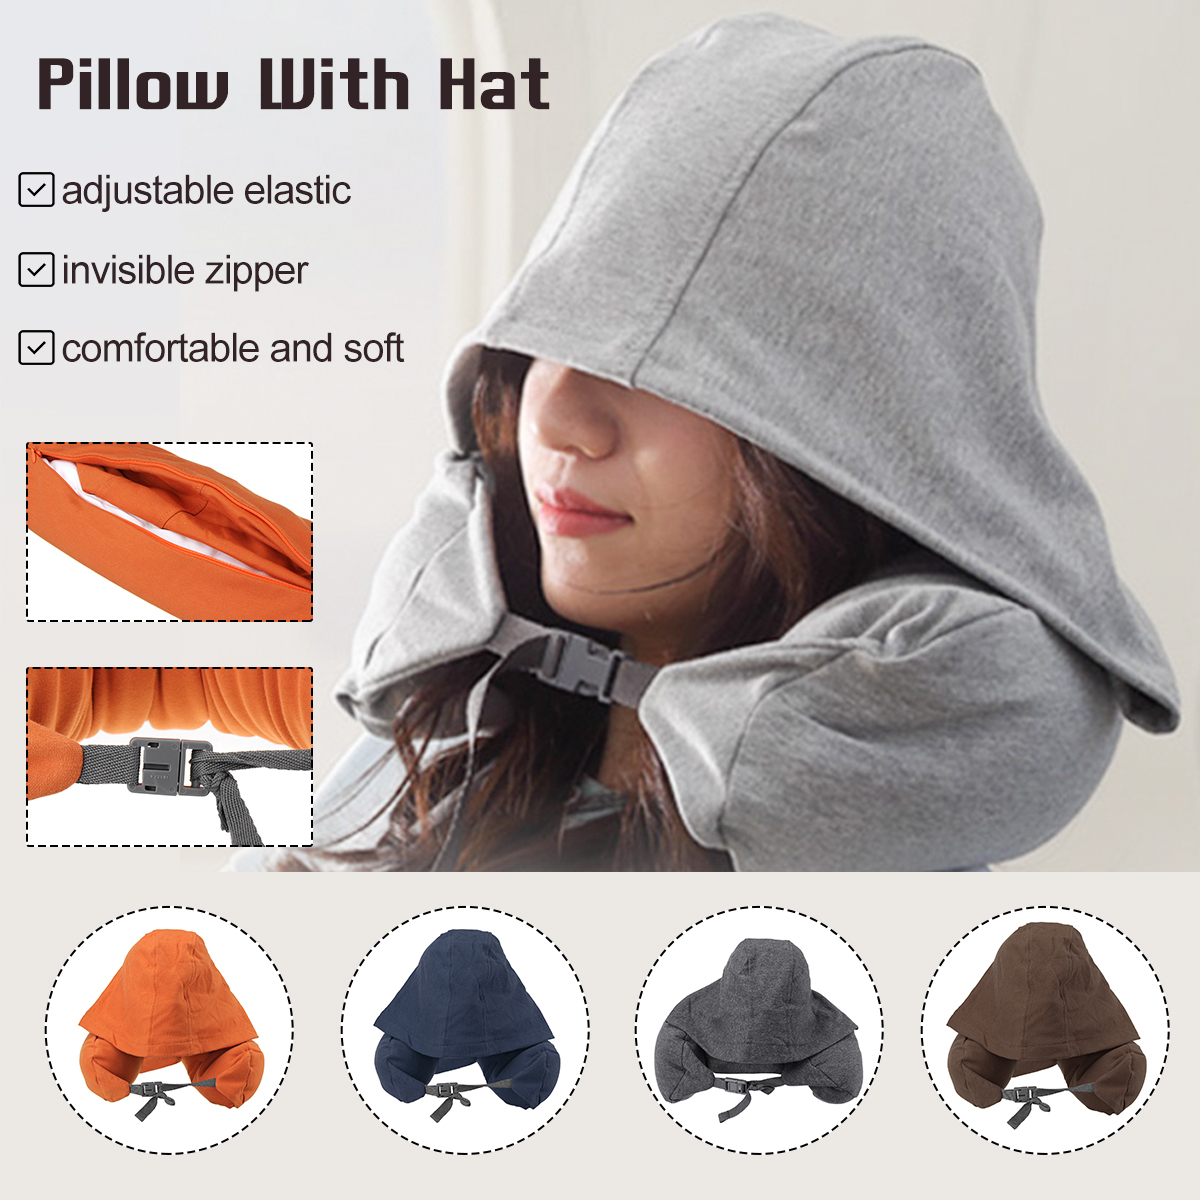 U-shaped-Pillow-Sleeping-Nap-Neck-Support-Cushion-With-Hat-Travel-Office-Home-Fitness-Relaxing-Pillo-1656404-1